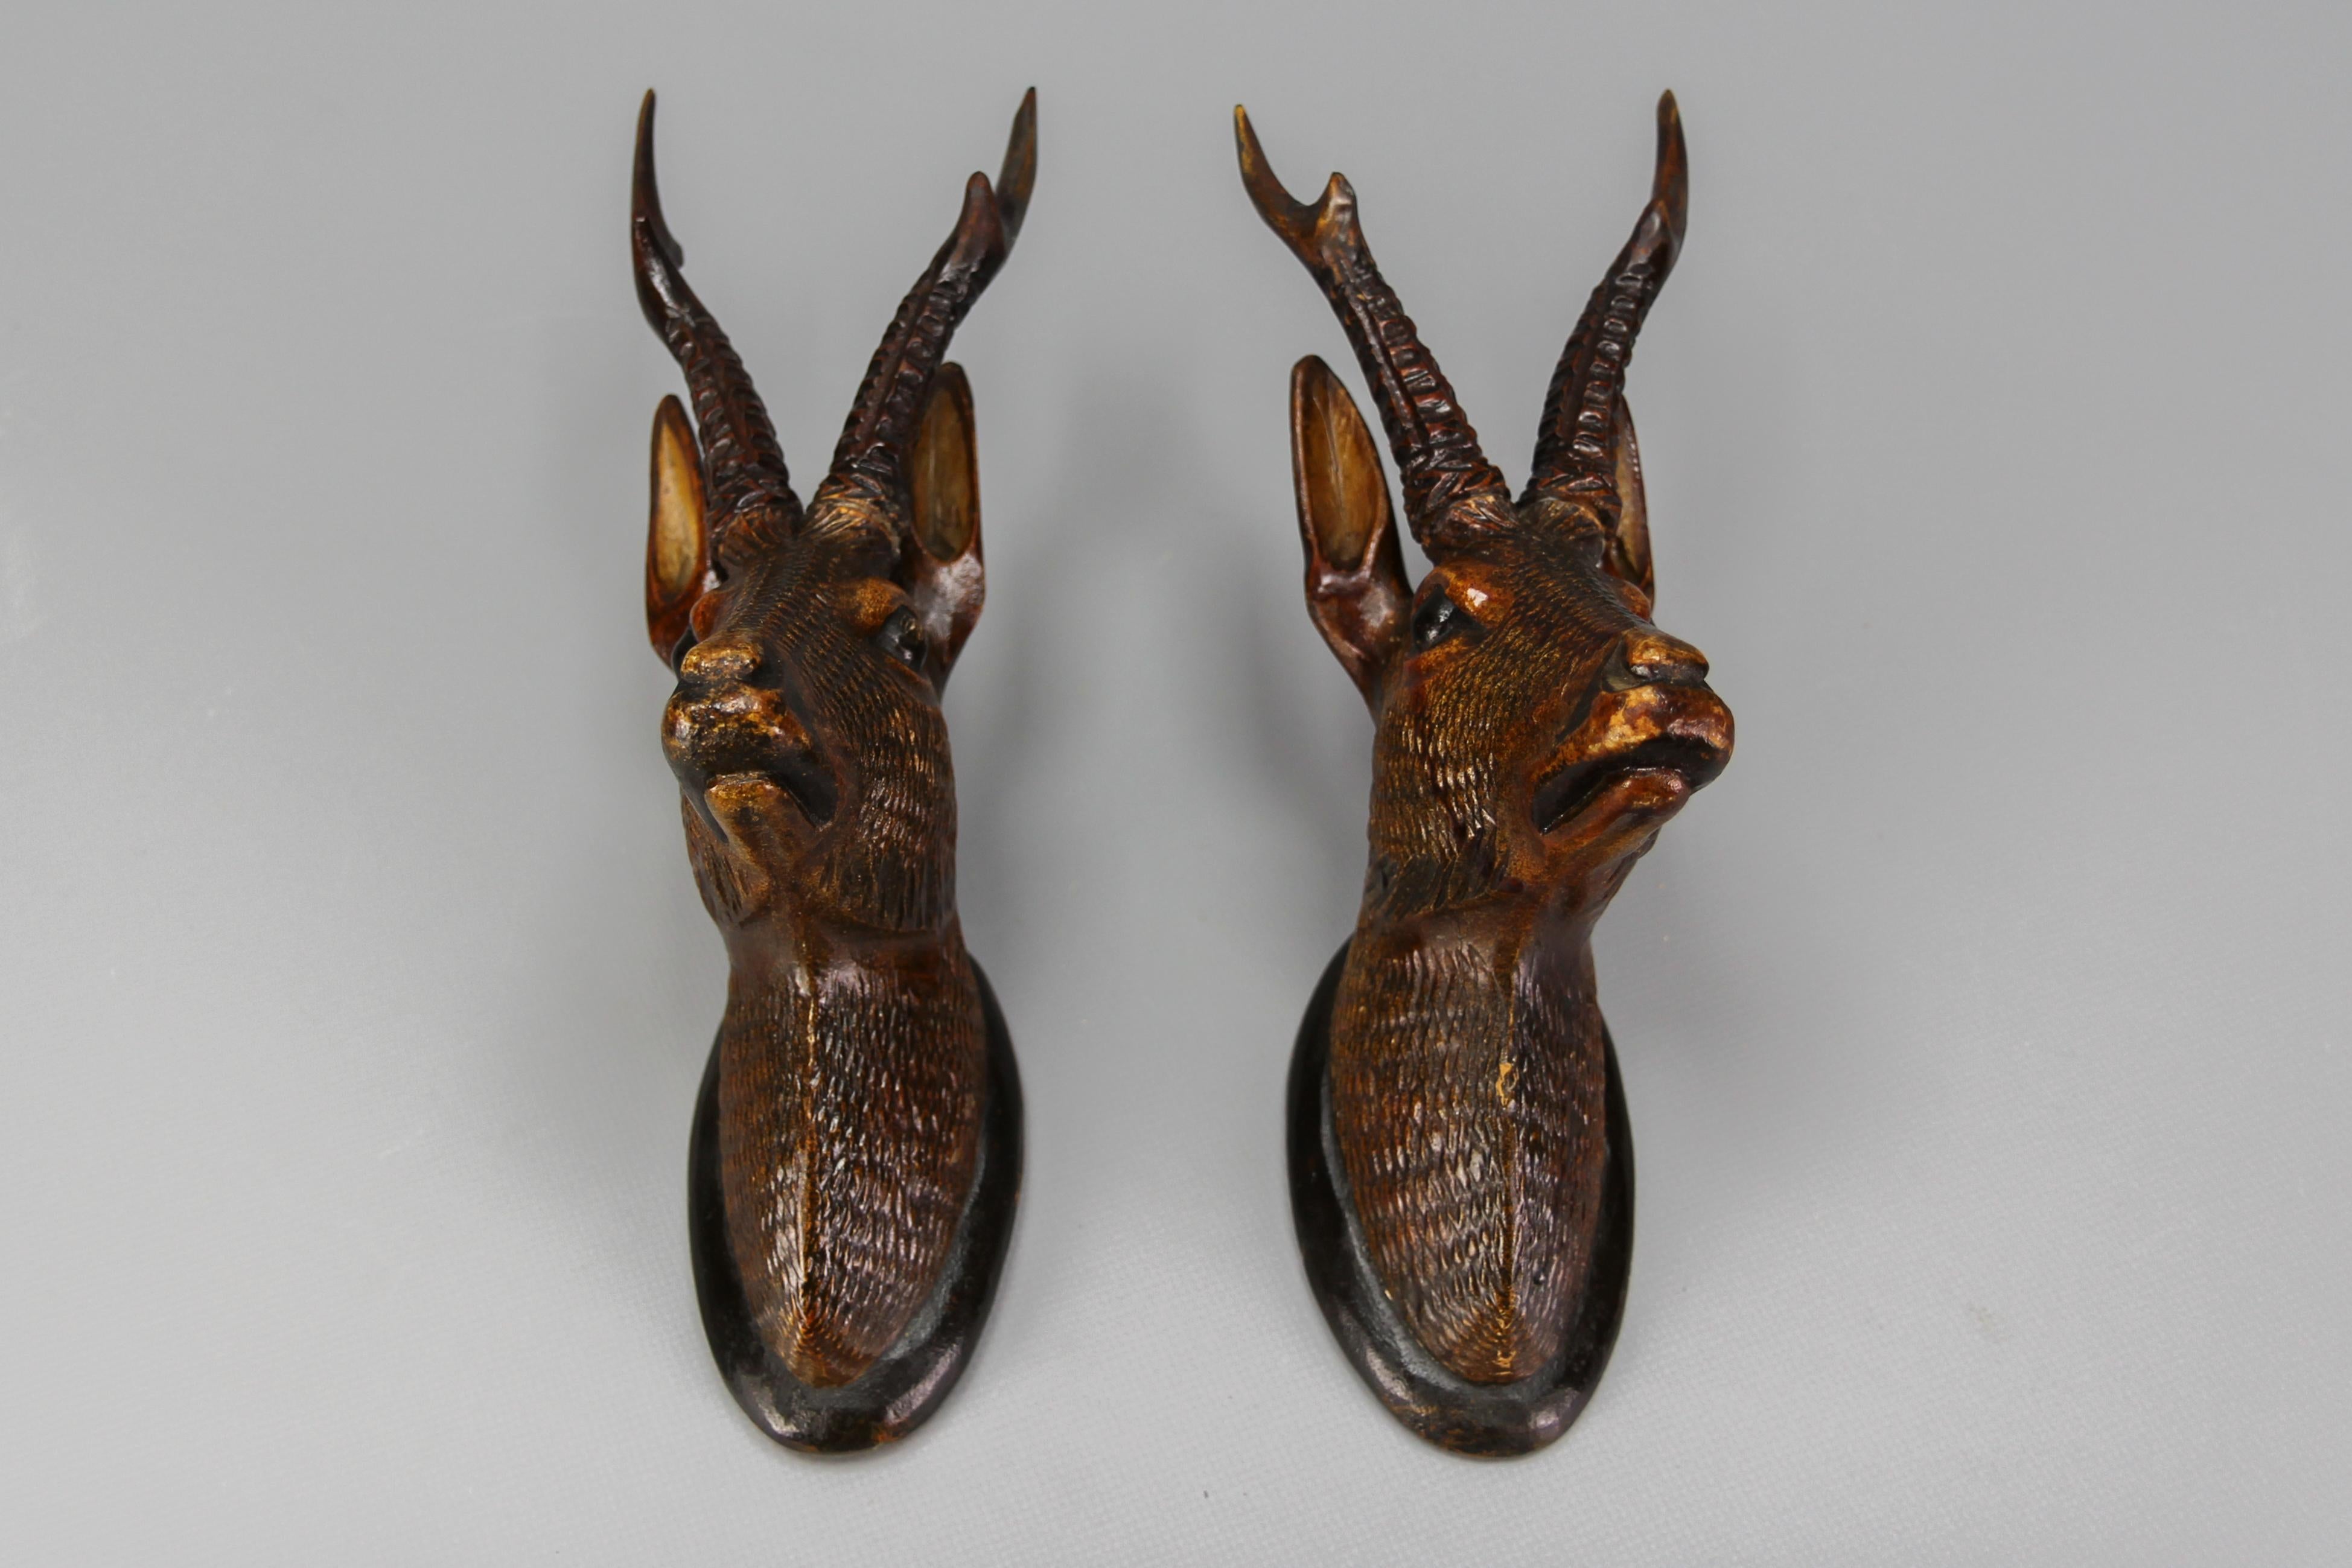 Late 19th century German black forest carved linden wood wall mounts of roe deer heads, decorations, set of two.
This absolutely adorable and small pair of roe deer heads is hand-carved of linden wood in dark brown and black tones. The antlers of